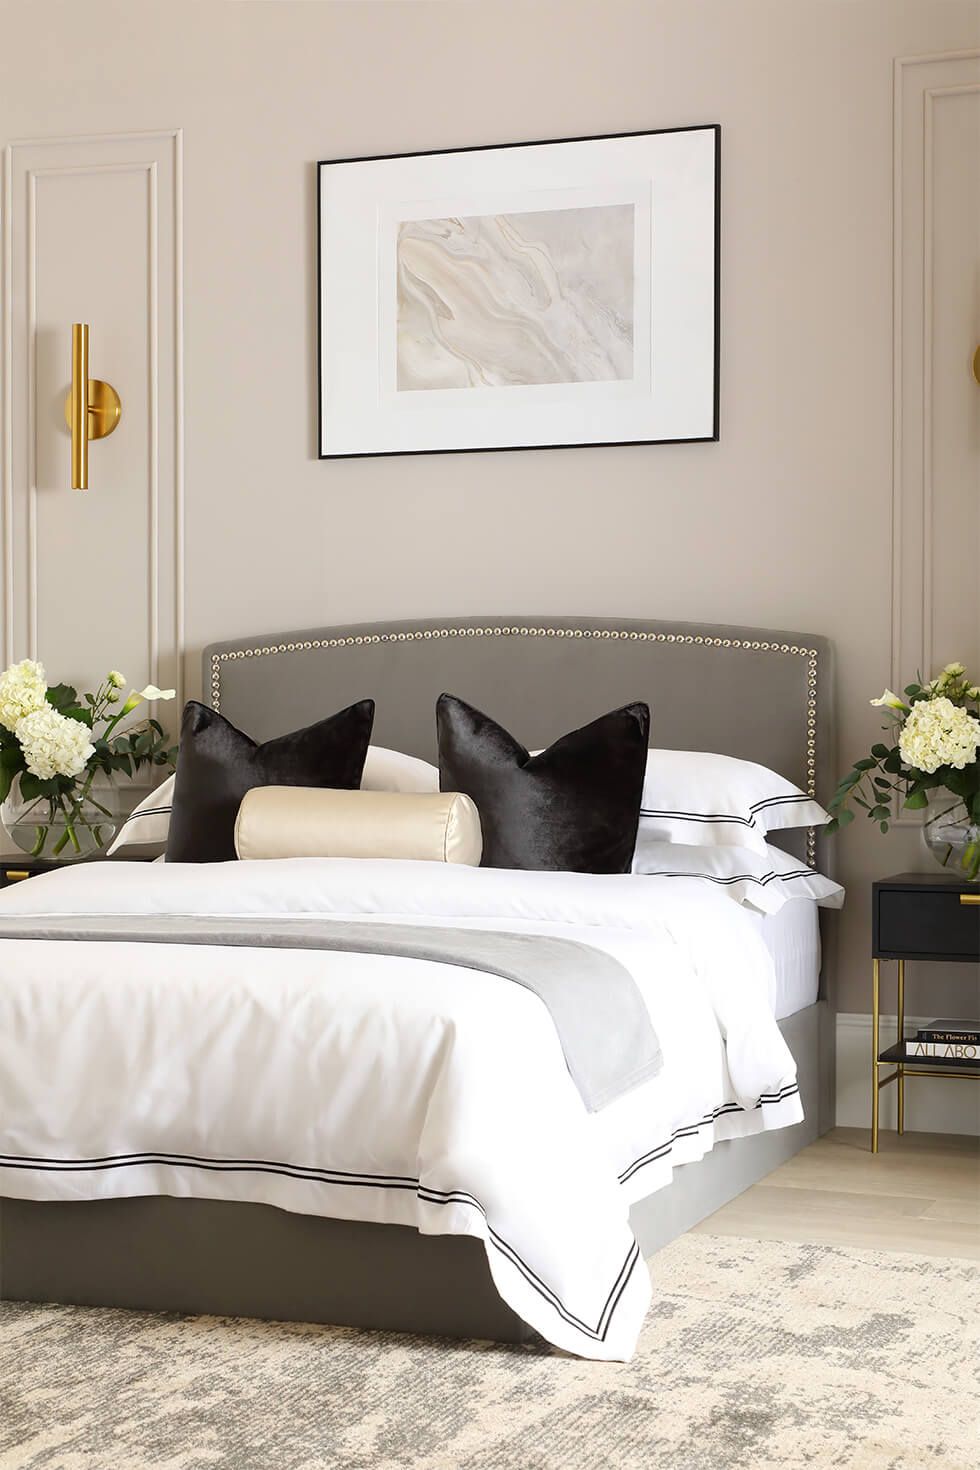 A luxurious bedroom with a velvet grey bed, black pillows and wall panelling